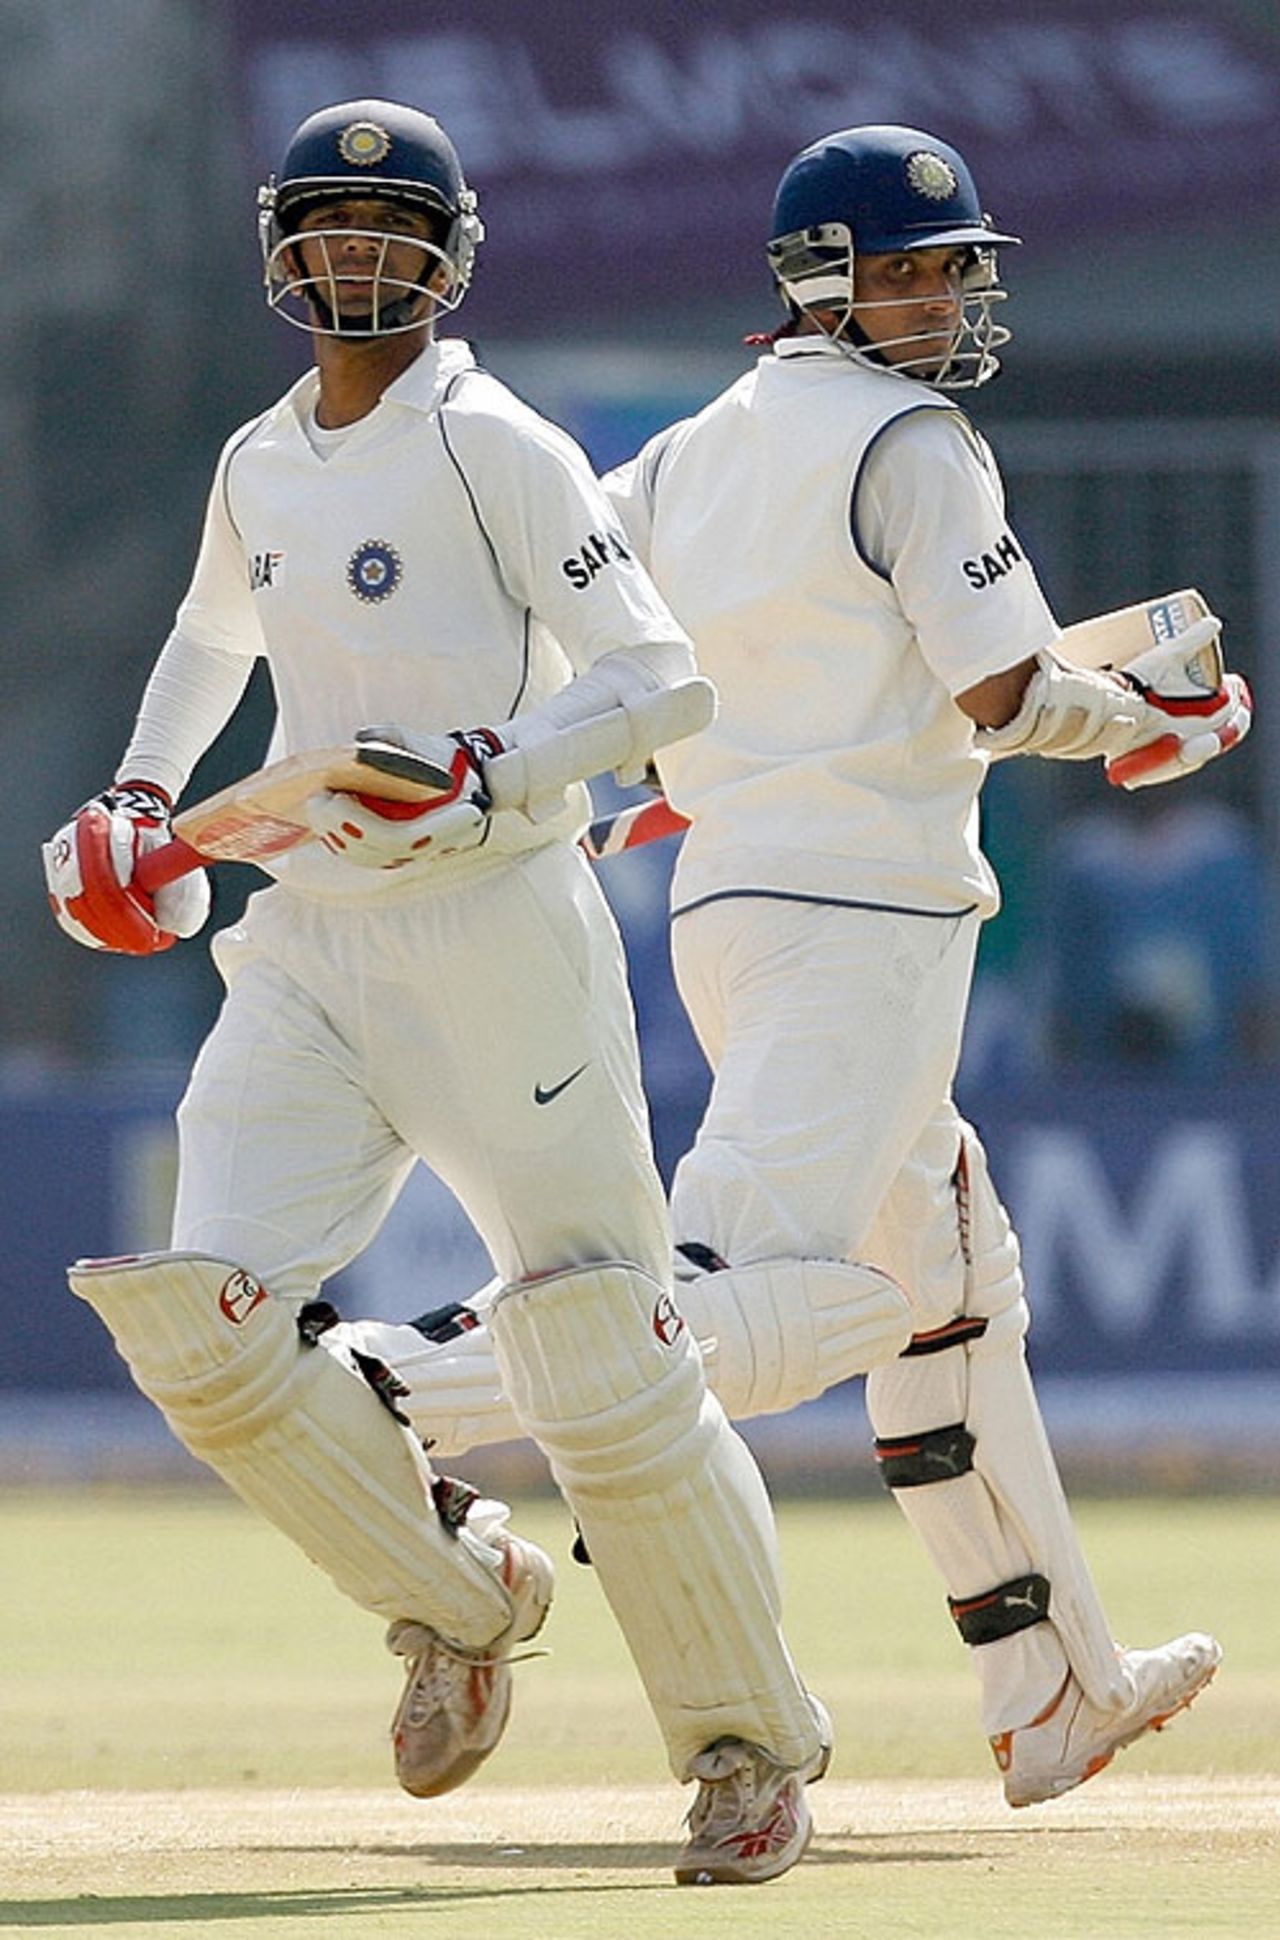 Rahul Dravid and Sourav Ganguly extended their stand to 152, India v Pakistan, 3rd Test, Bangalore, 5th day, December 12, 2007 

